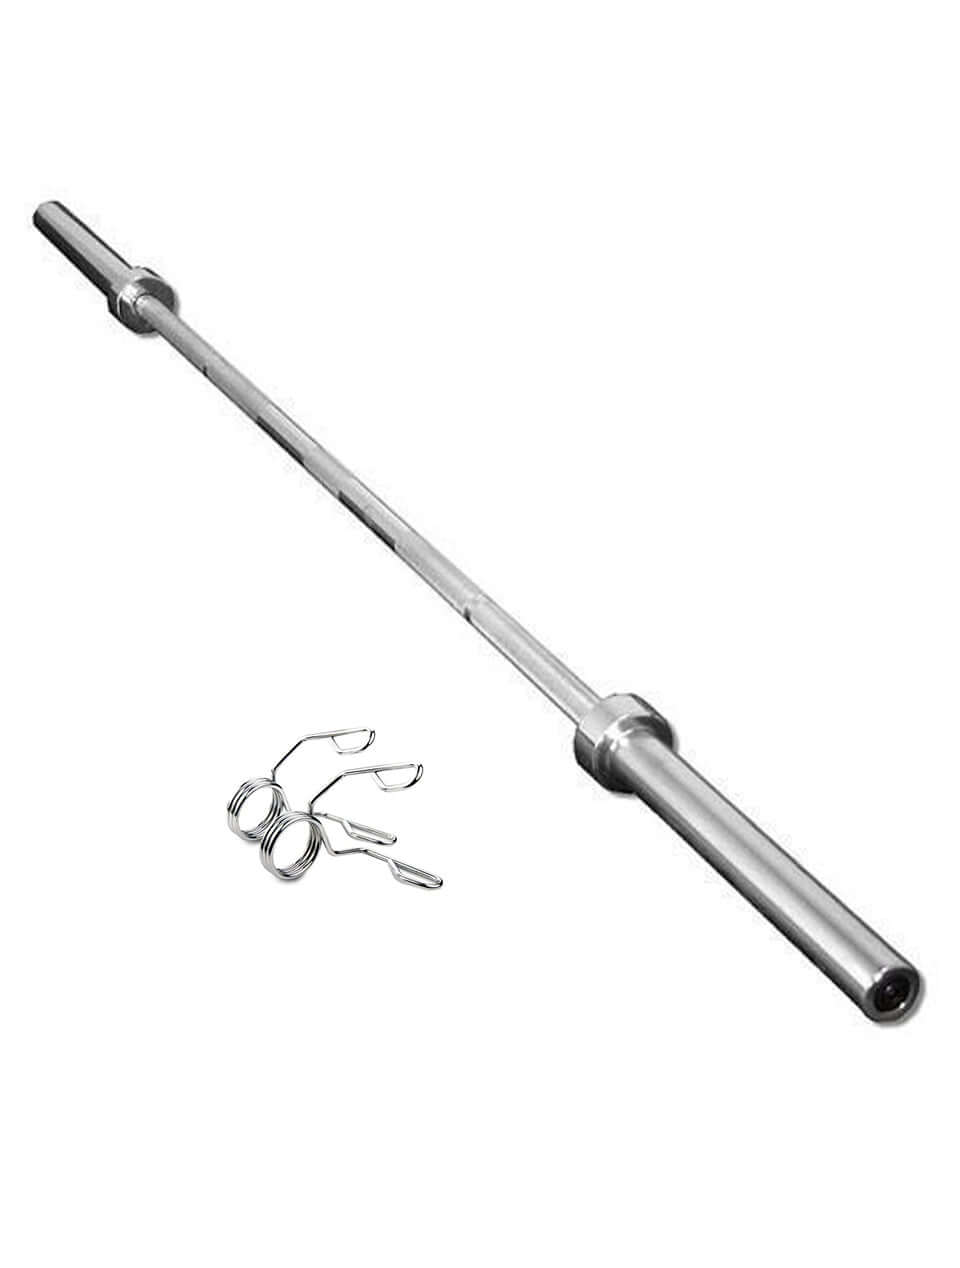 Olympic Barbell with Collars - 10 Kg